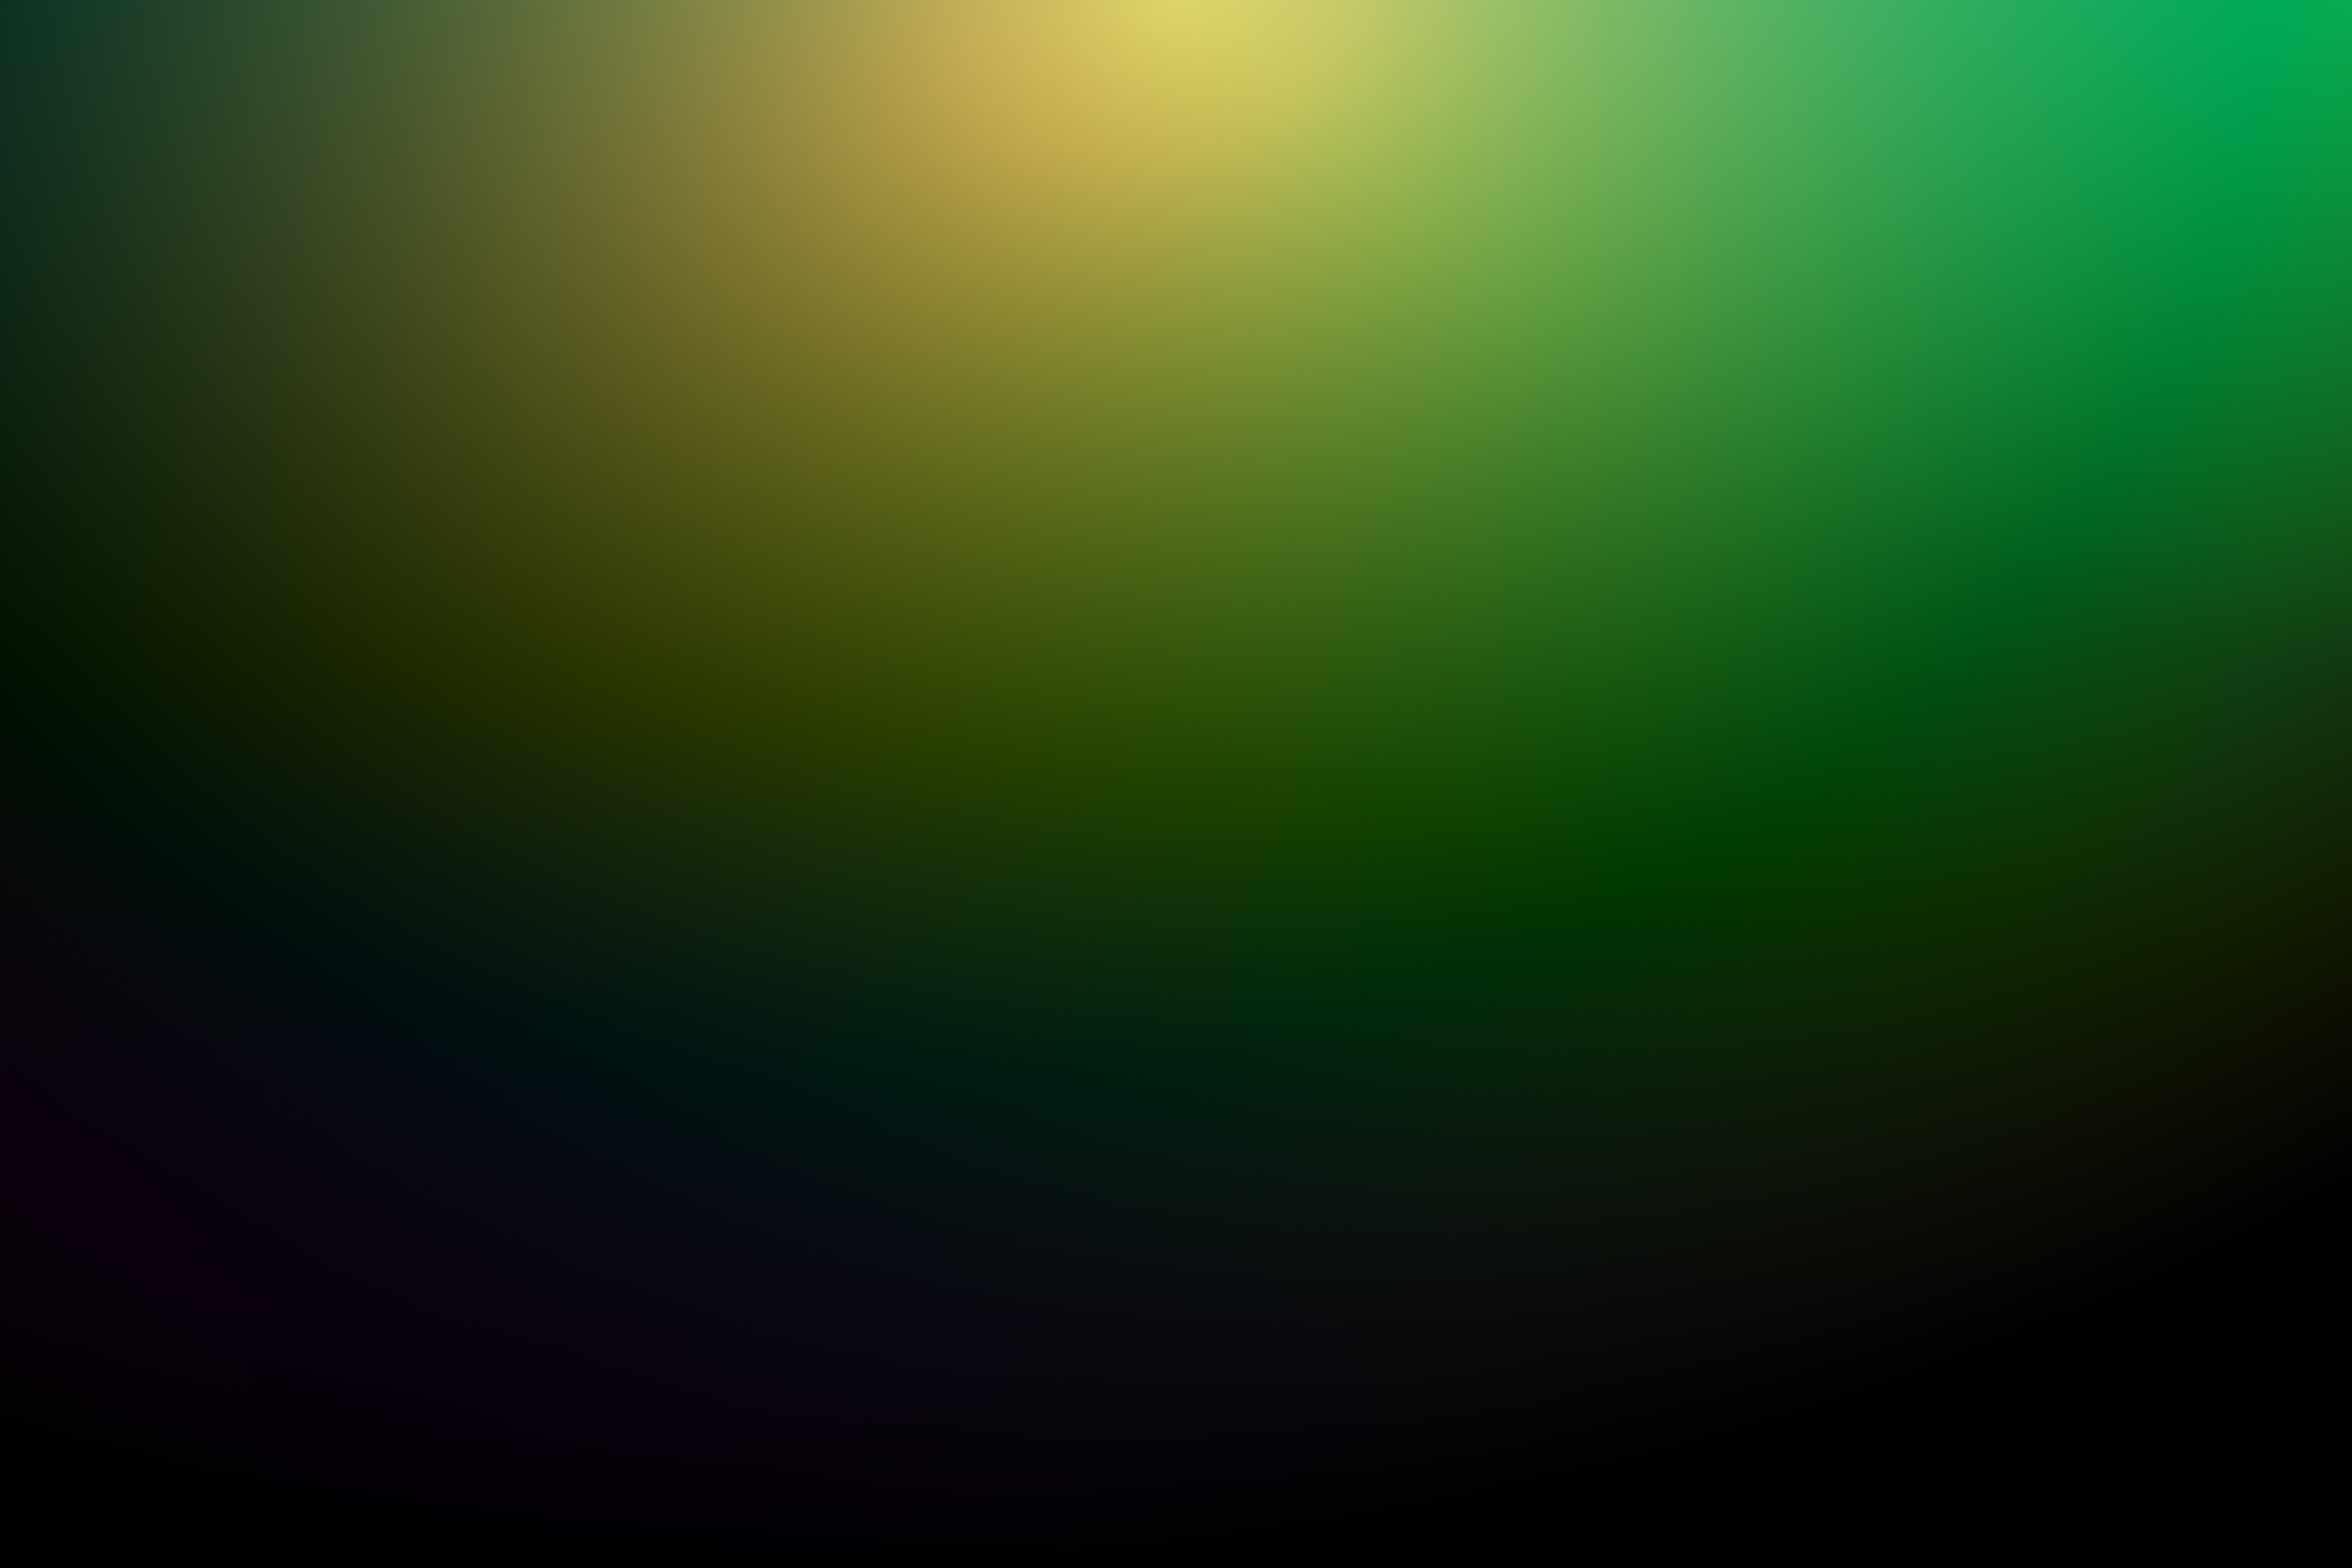 Gradient of Black, Green and Yellow